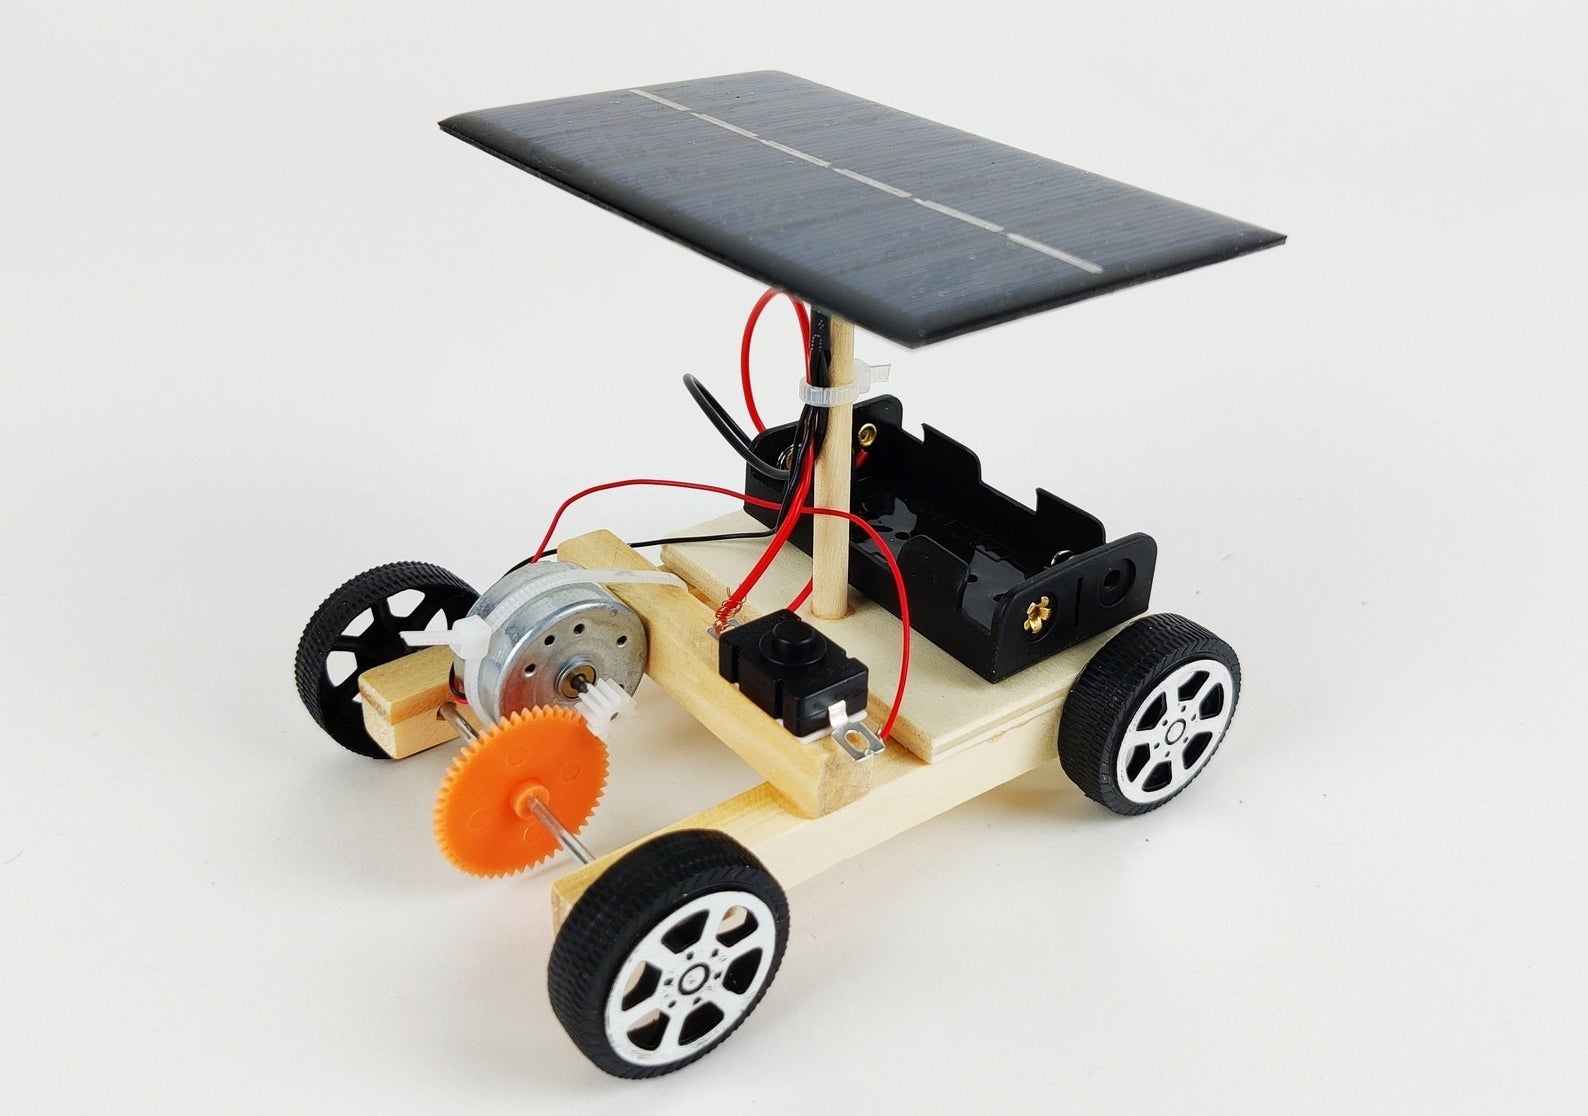 The solar car fashioned out of wood and other parts